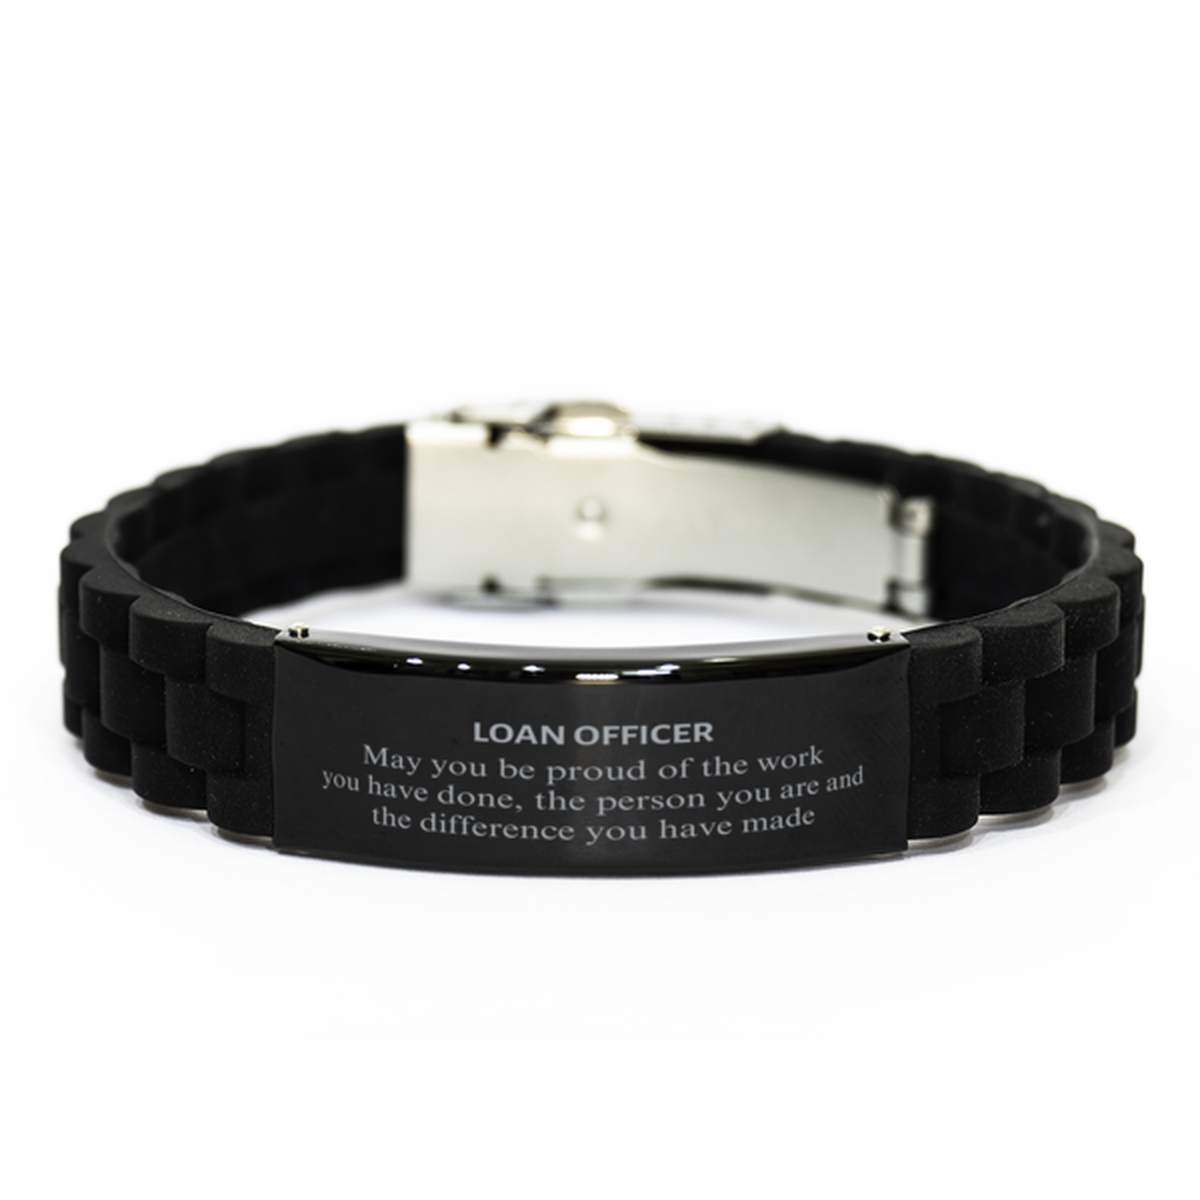 Loan Officer May you be proud of the work you have done, Retirement Loan Officer Black Glidelock Clasp Bracelet for Colleague Appreciation Gifts Amazing for Loan Officer